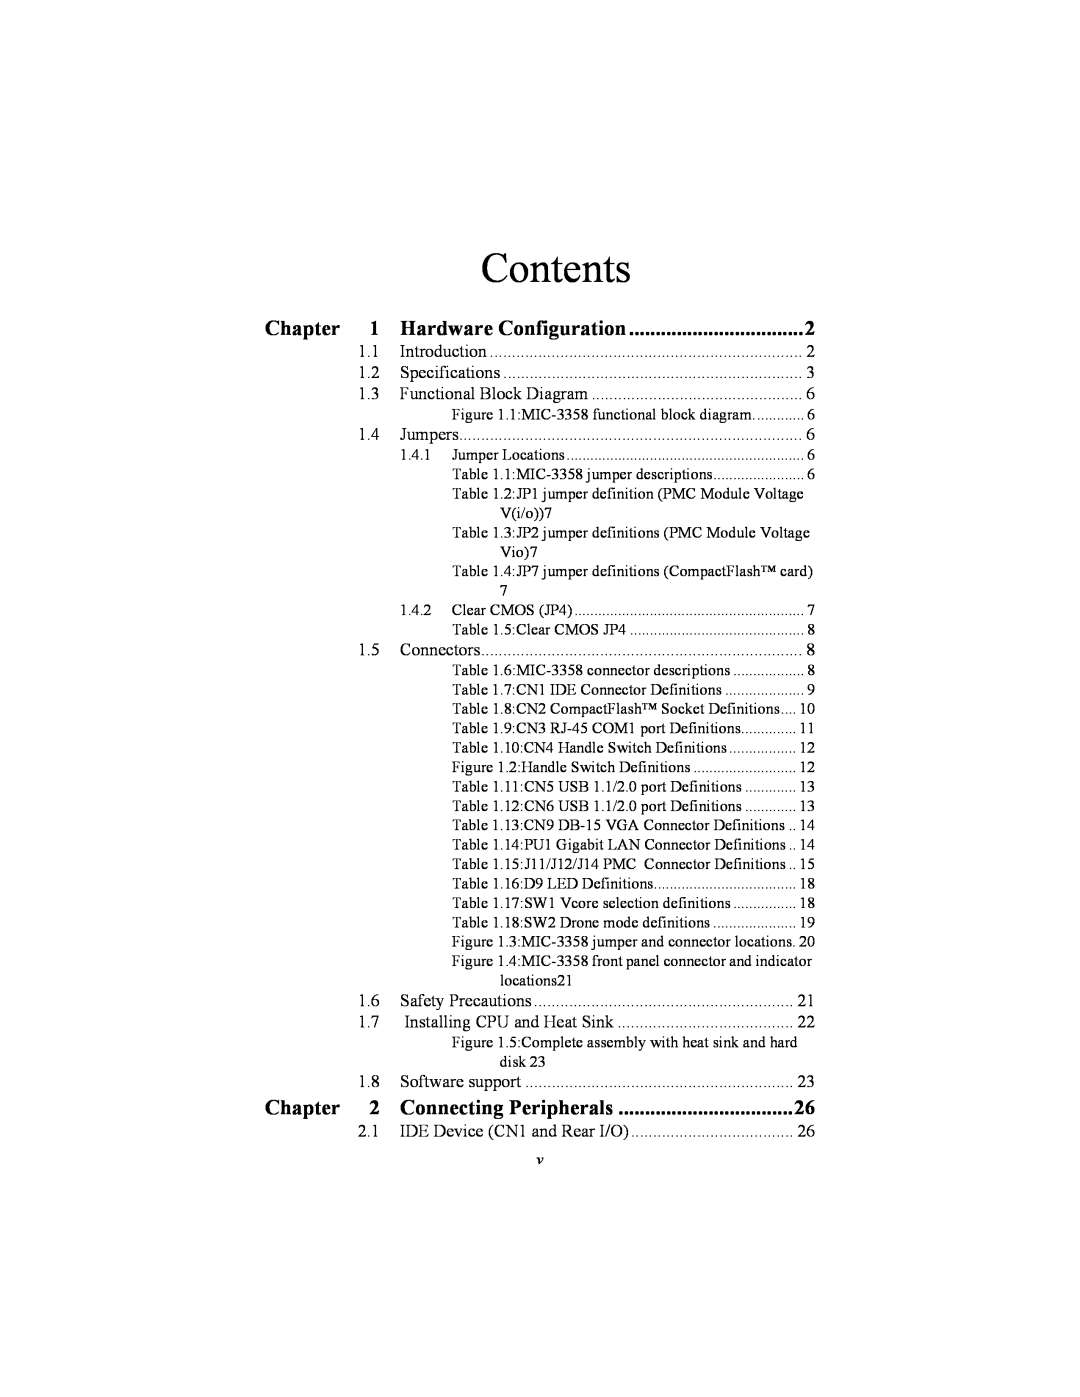 Intel MIC-3358 user manual Chapter, Hardware Configuration, Connecting Peripherals, Contents 